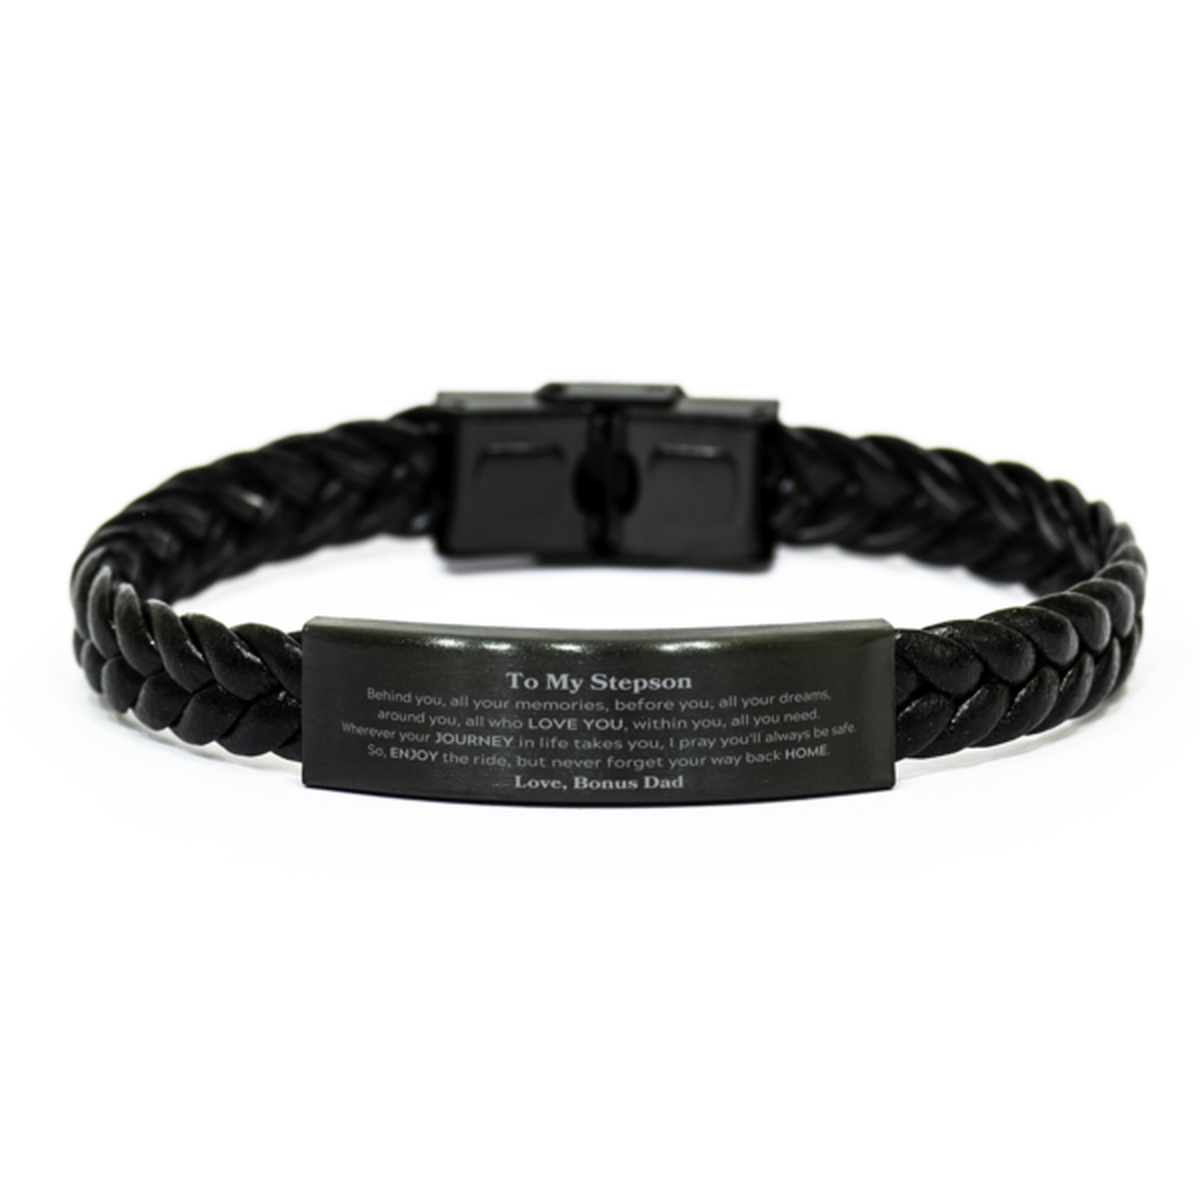 To My Stepson Graduation Gifts from Bonus Dad, Stepson Braided Leather Bracelet Christmas Birthday Gifts for Stepson Behind you, all your memories, before you, all your dreams. Love, Bonus Dad